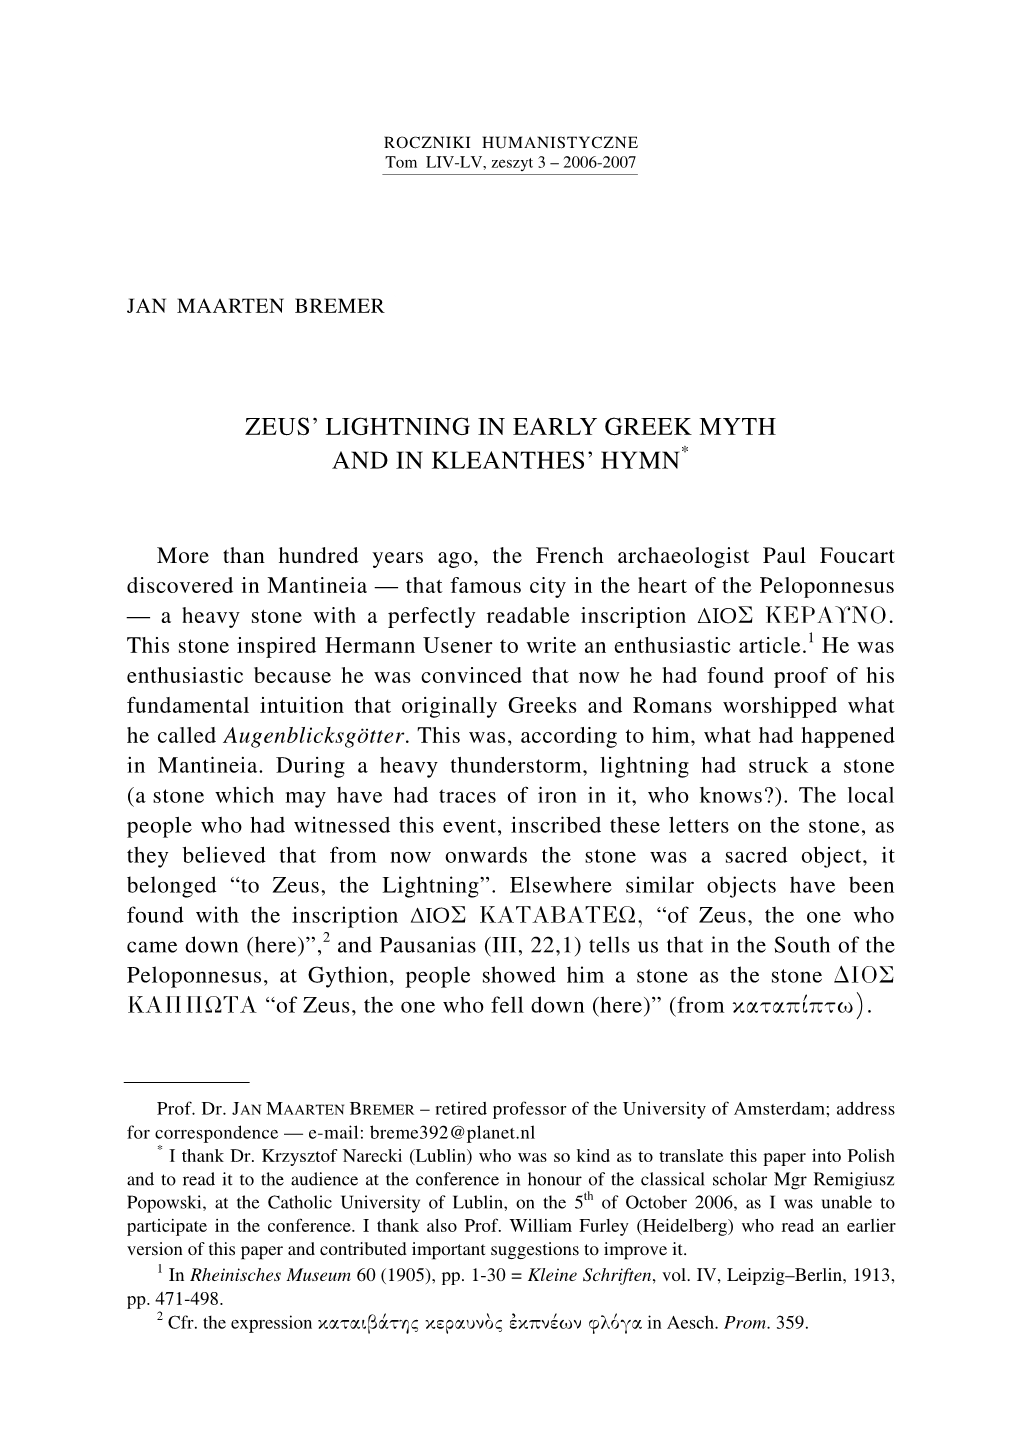 Zeus' Lightning in Early Greek Myth and in Kleanthes' Hymn*